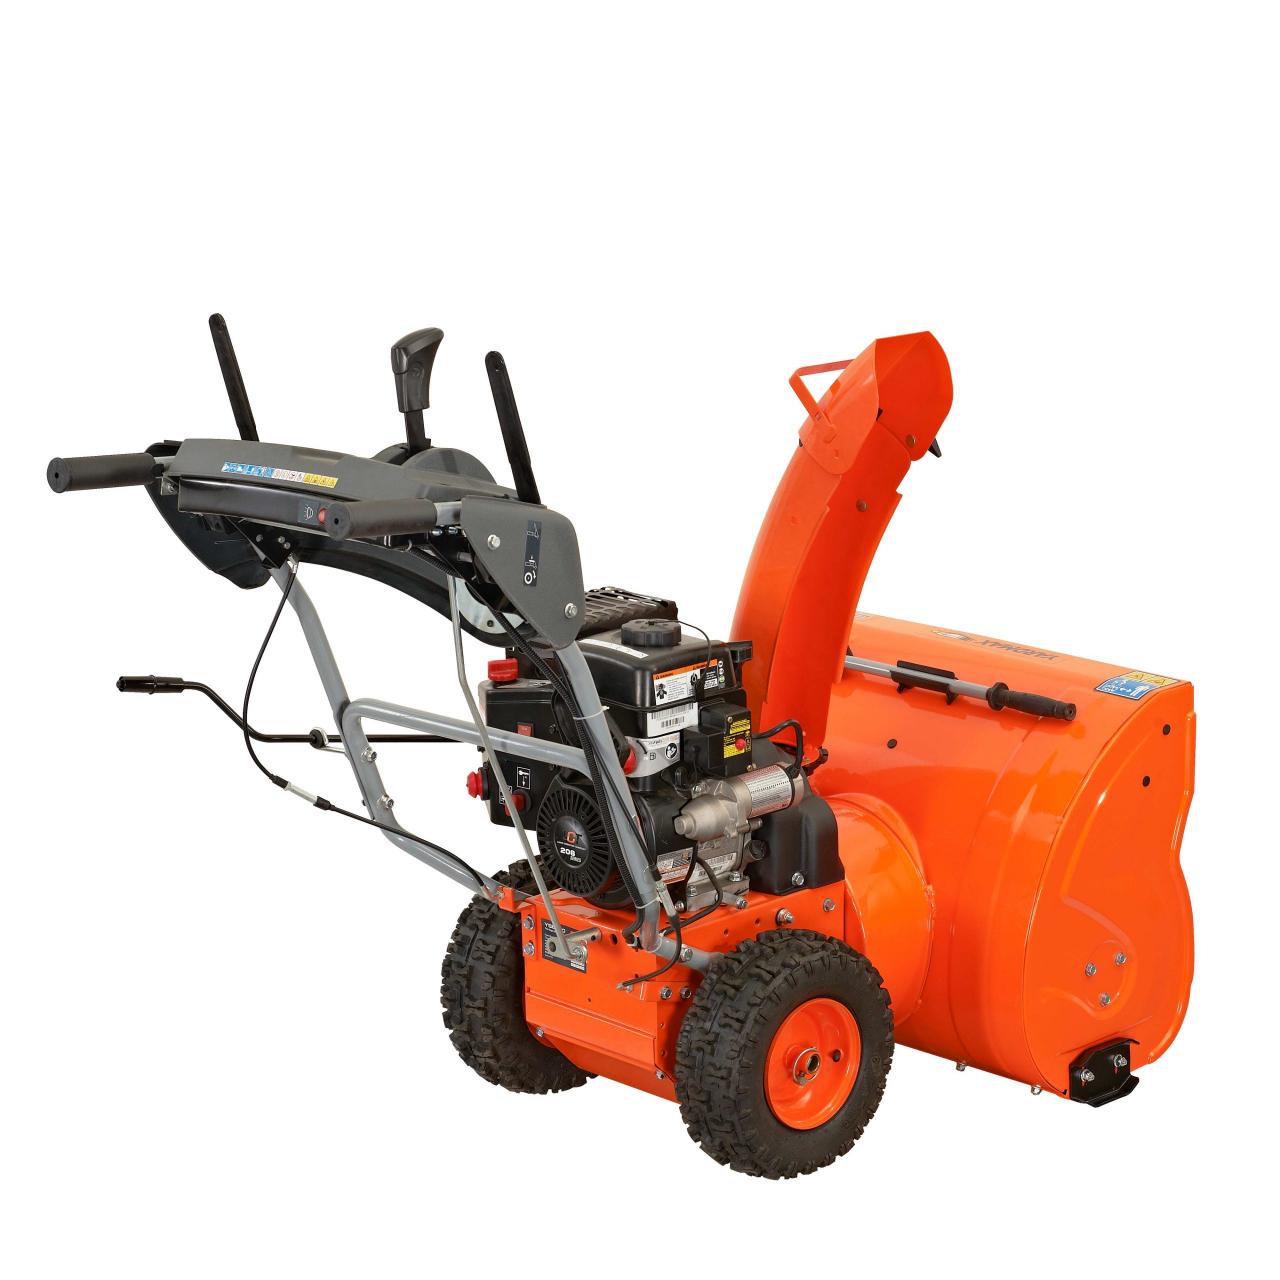 Yardmax 2-stage, 26-in Snowblower with Dashboard and electric start